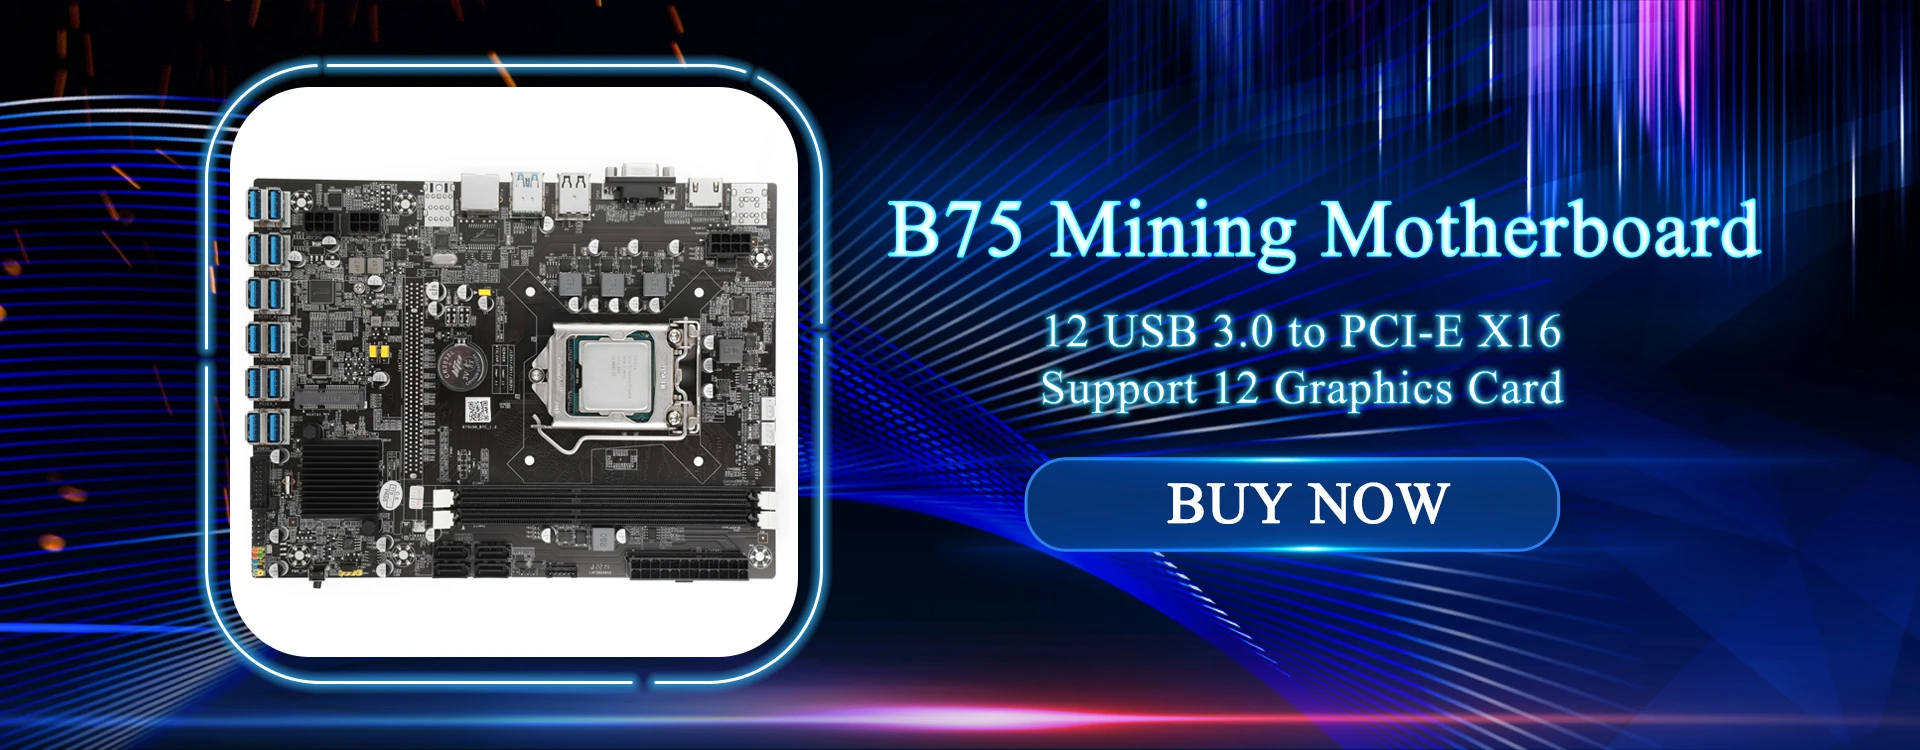 latest computer motherboard B250C Mining Motherboard 12 USB 3.0 to PCIe X16 PCI-E 16X Graphics Card LGA 1151 DDR4 SATA Bitcoin BTC ETH Miner top pc motherboards